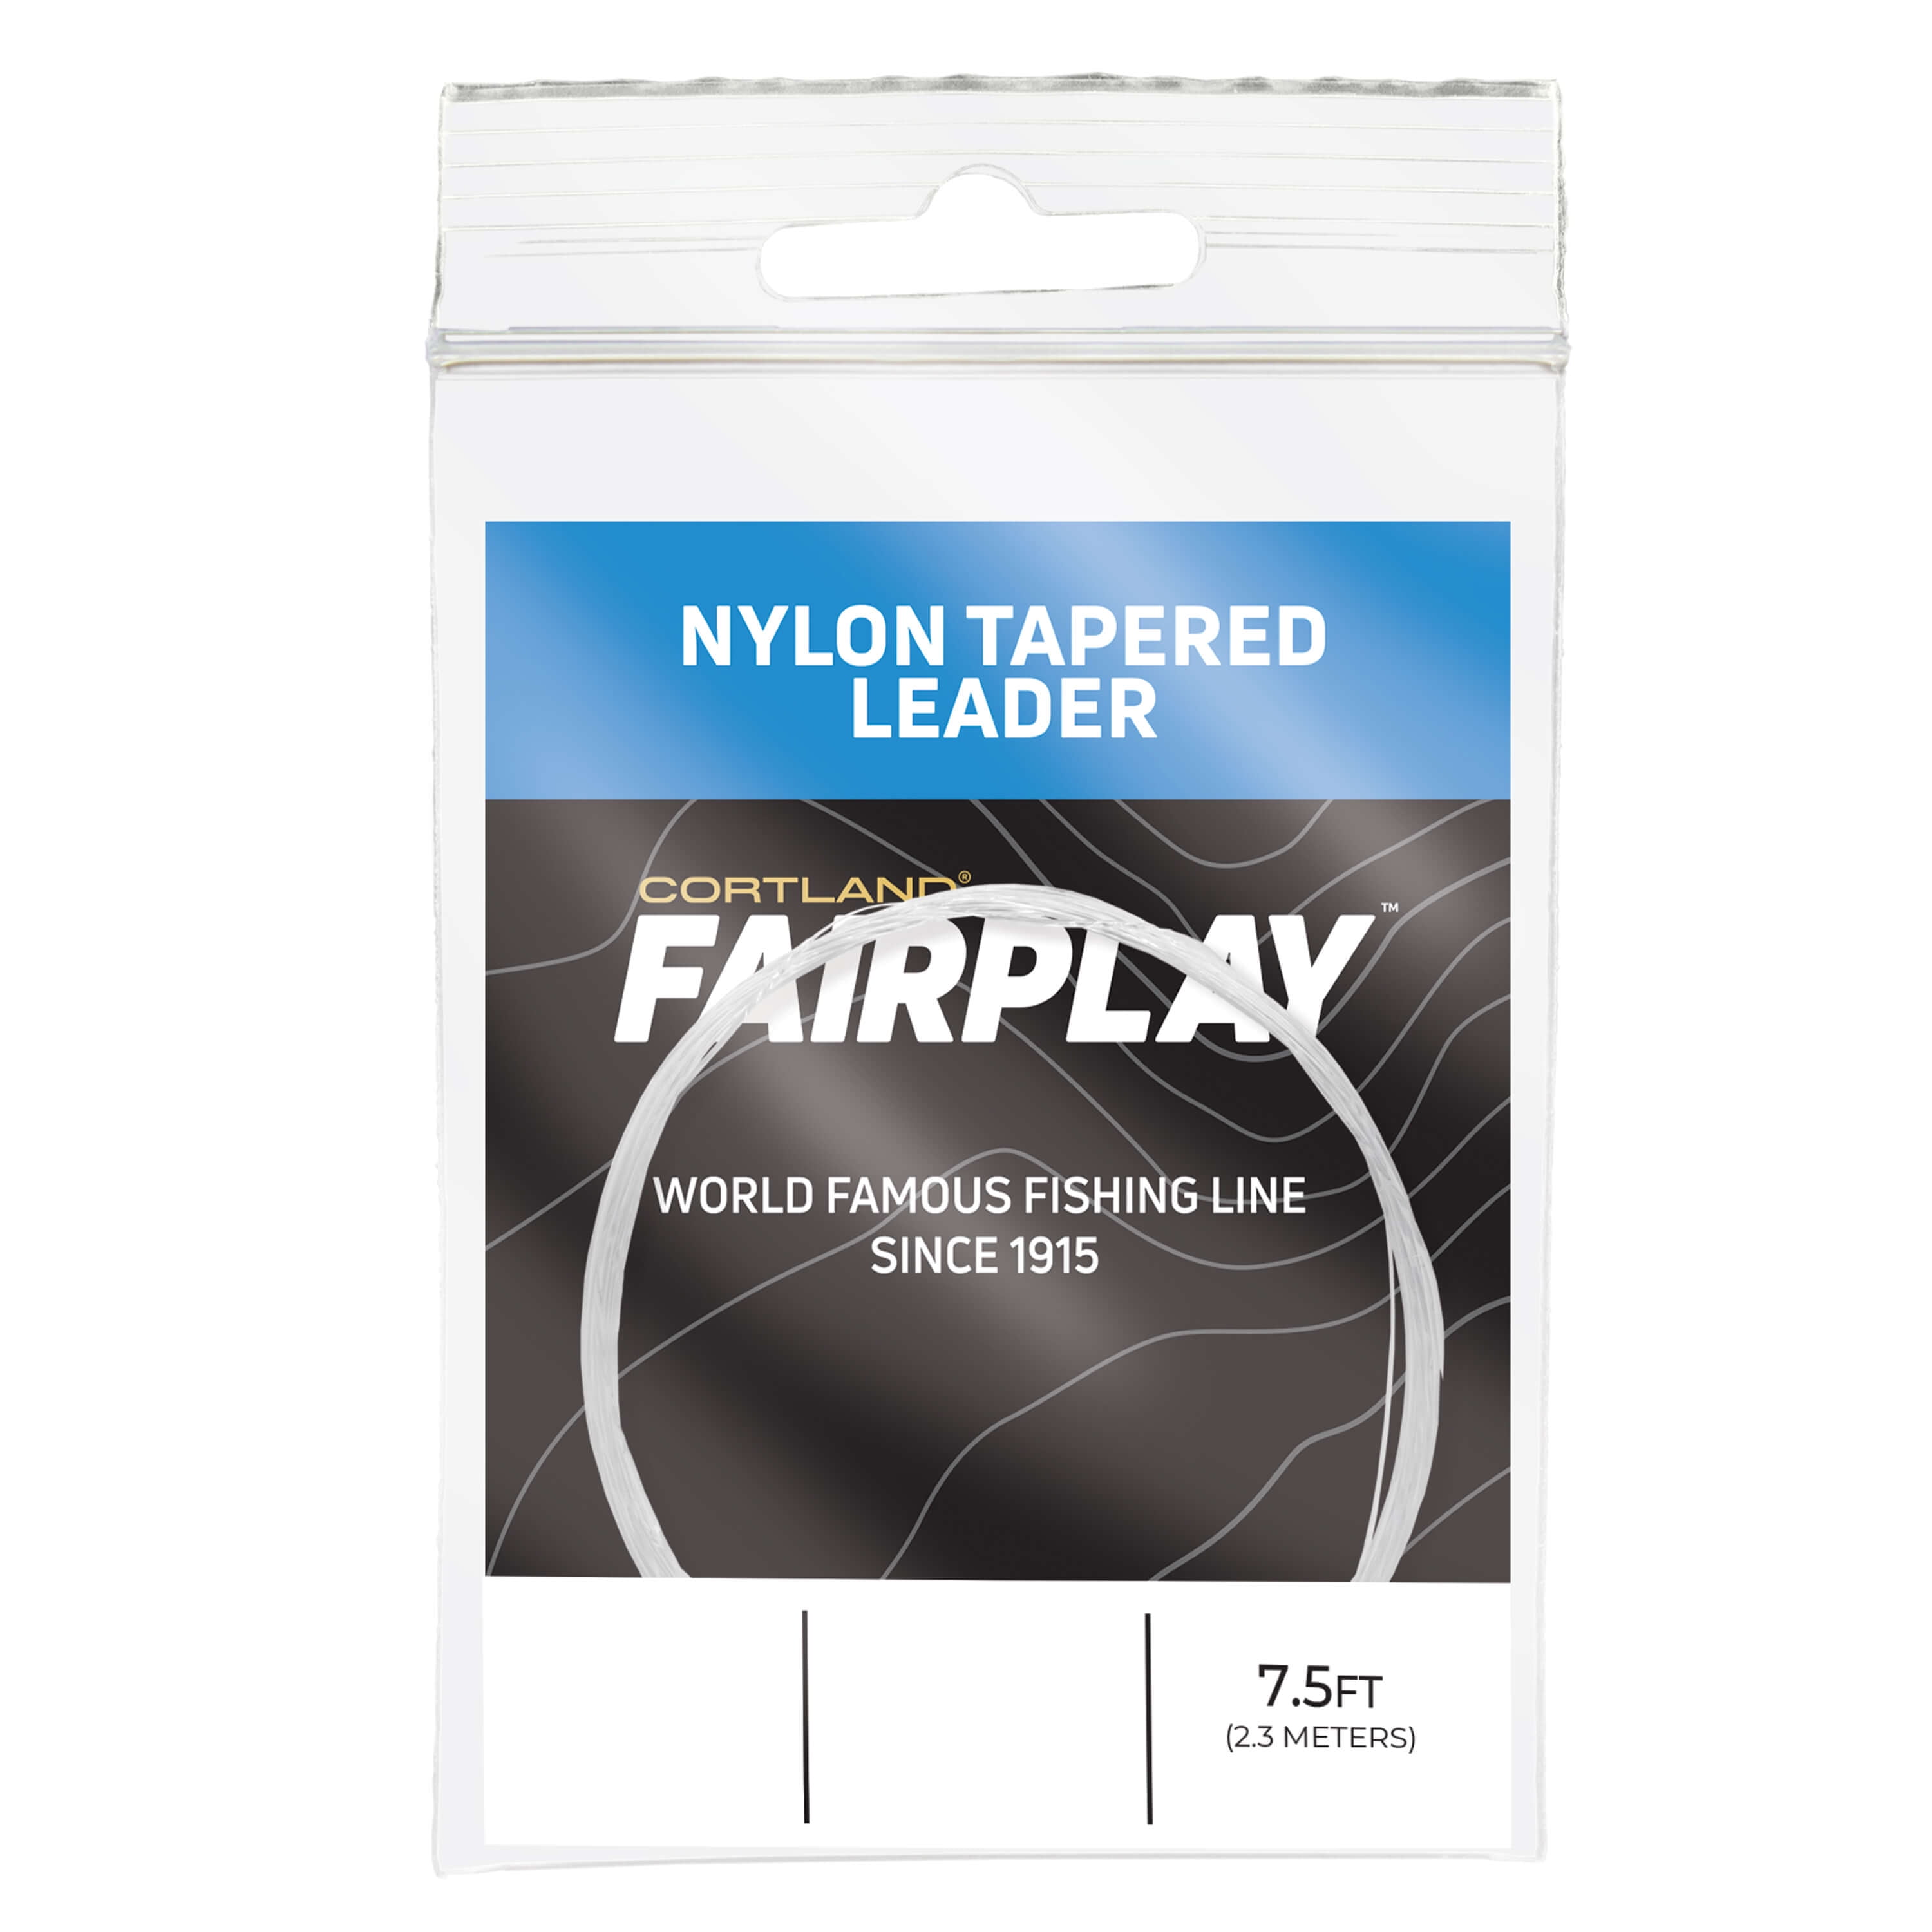 Cortland Fairplay 7.5' Nylon Monofilament Tapered Fly Fishing Leader, 2X,  9lb Test, 605176